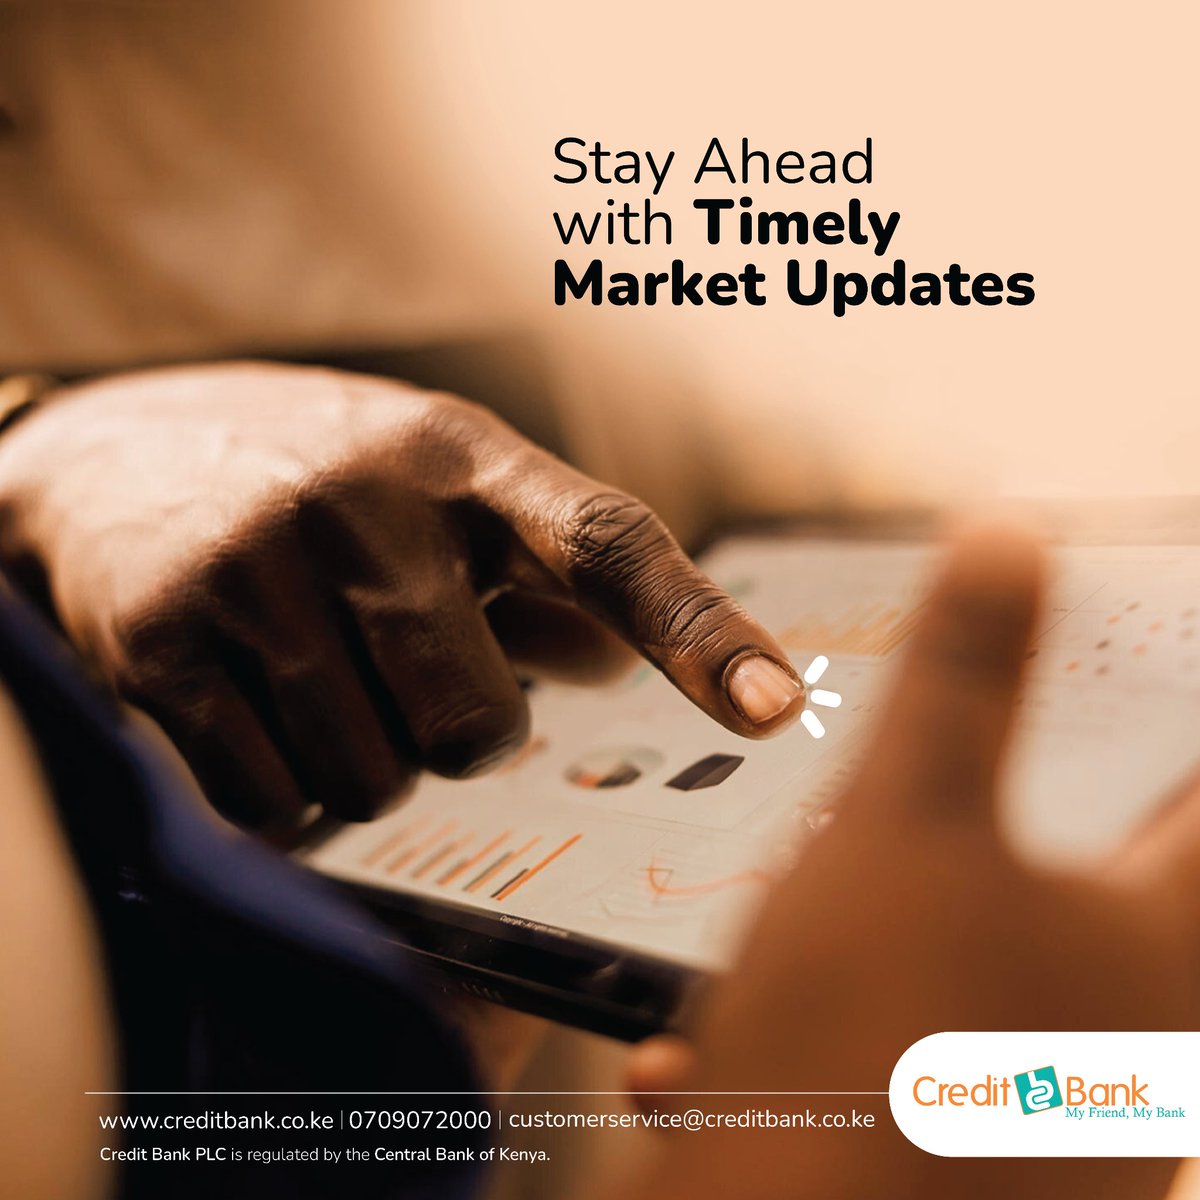 Keep your finger on the pulse of the market with our timely updates. Stay informed, stay ahead! Contact us today to learn more about our Custodial Services and how we can help you achieve your financial goals

#MarketUpdates #FinancialInsights #Yourfriendyourbank